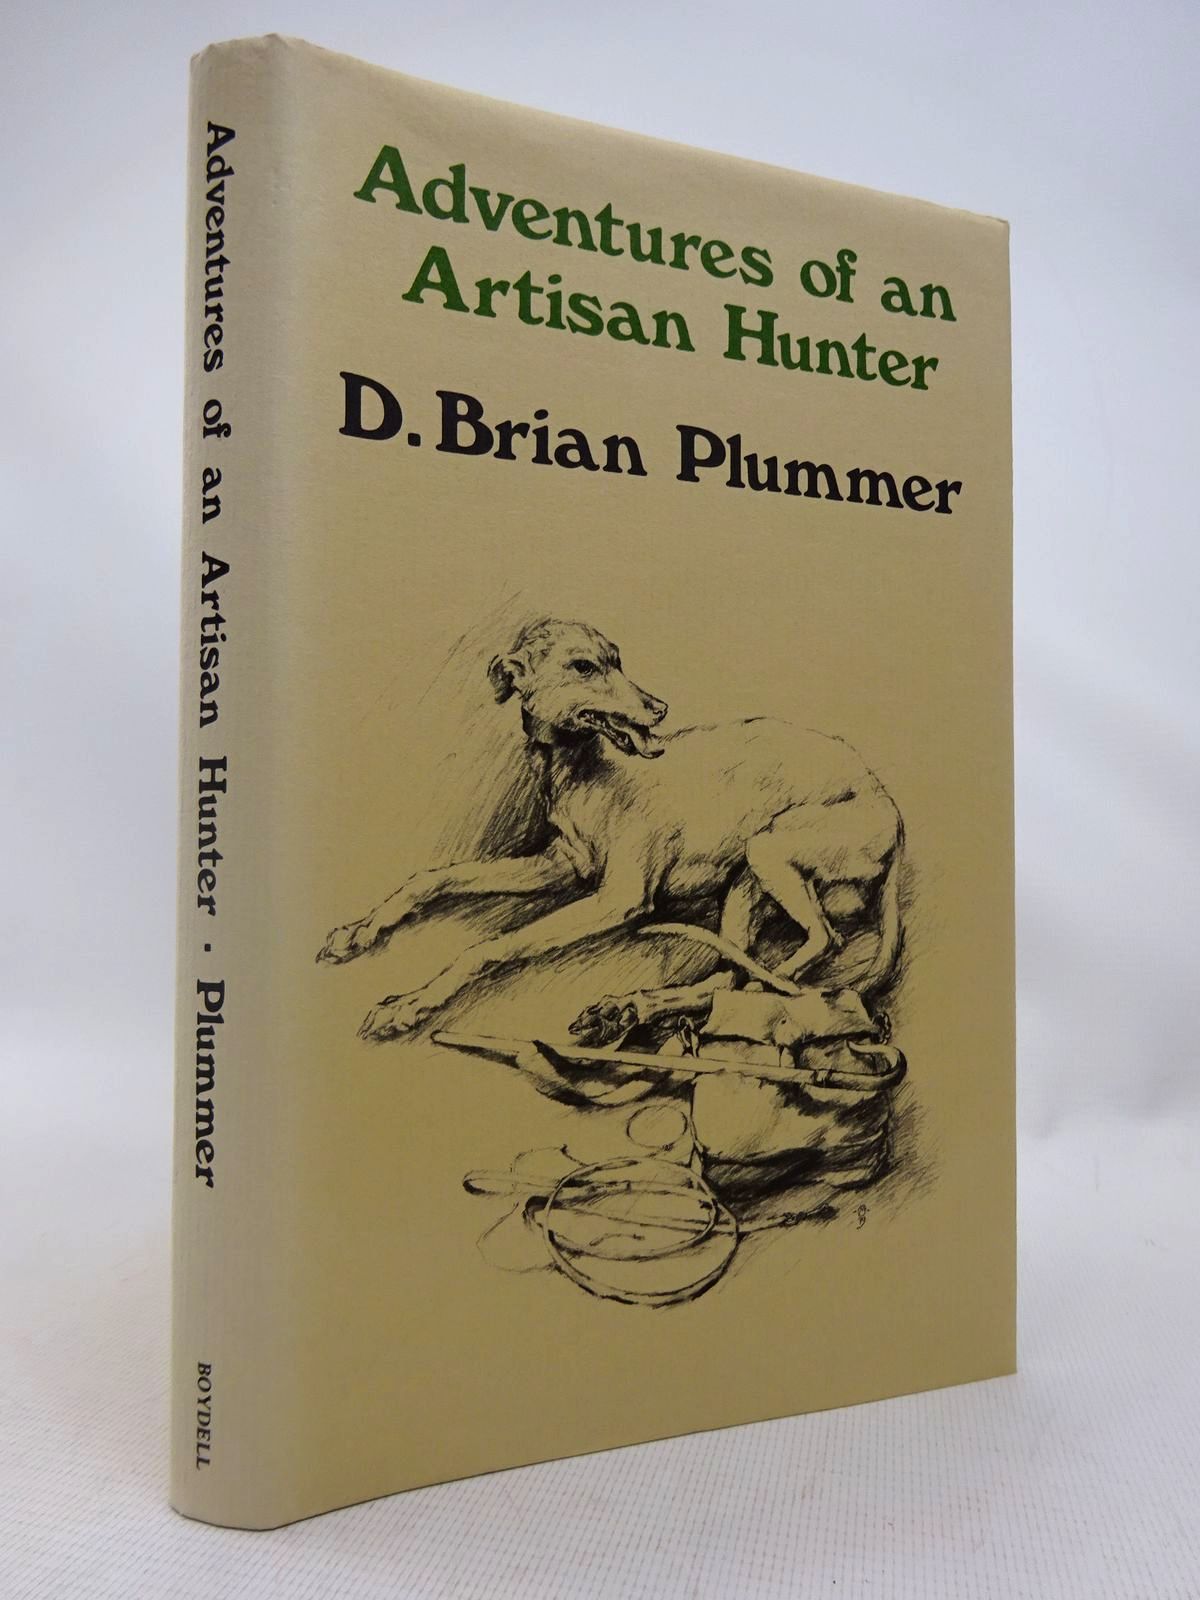 Photo of THE ADVENTURES OF AN ARTISAN HUNTER written by Plummer, David Brian illustrated by Knowelden, Martin published by The Boydell Press (STOCK CODE: 1816662)  for sale by Stella & Rose's Books